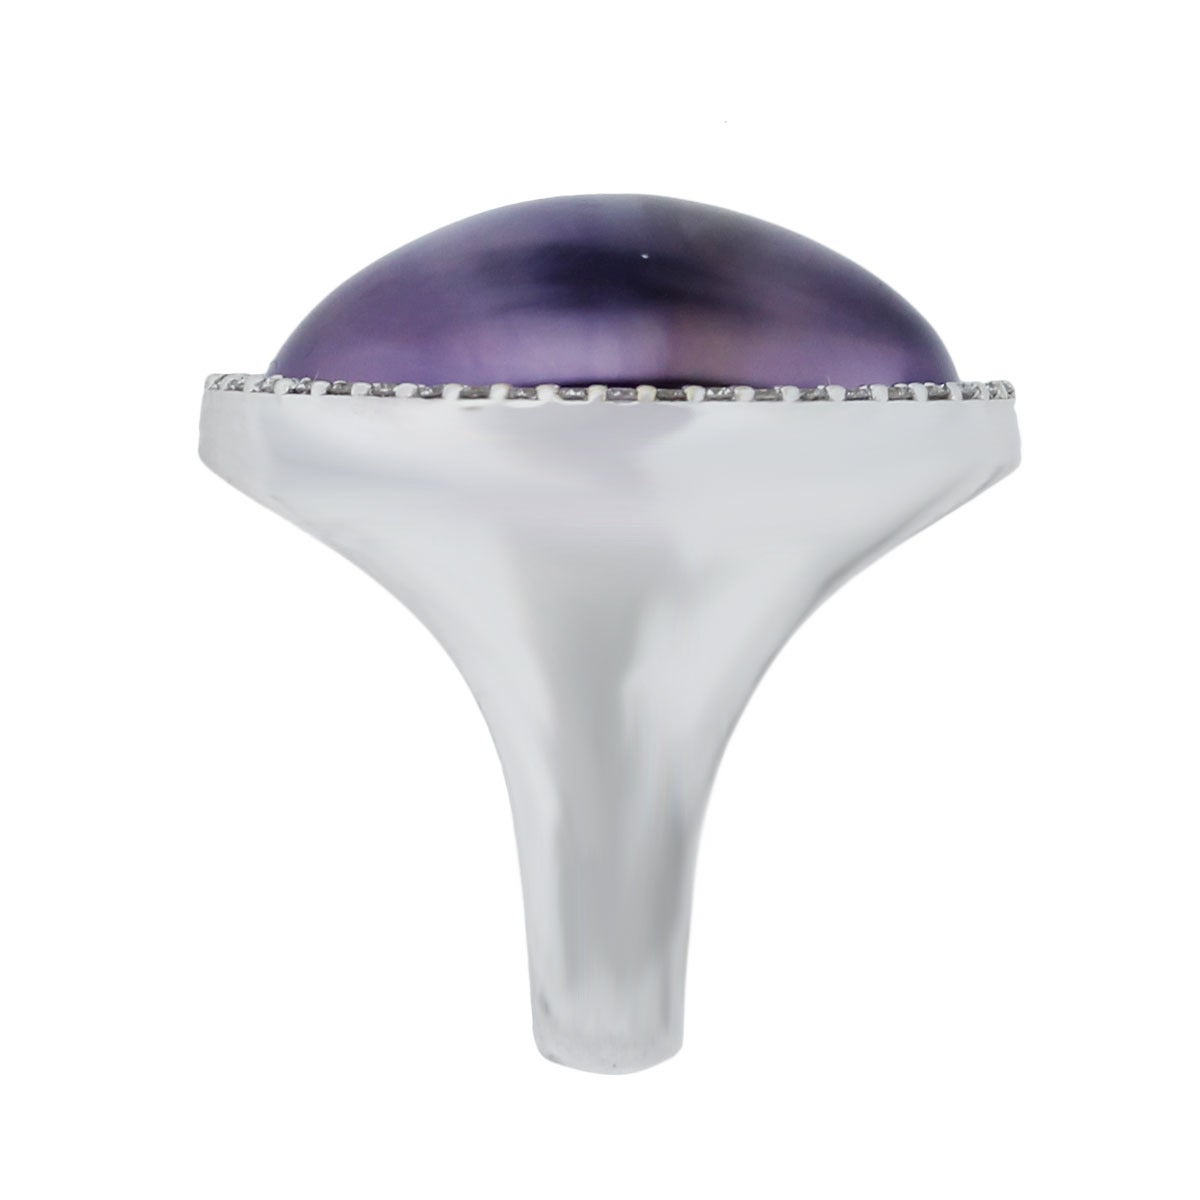 Brand: Roberto Coin
Style: Roberto Coin Diamond Amethyst & Mother of Pearl Diamond Ring
Material : 18k White Gold
Gemstone Details: Amethyst & Mother of Pearl Cabochon
Diamond Details : 0.40ctw of Round Brilliant Diamonds. Diamonds are G in color